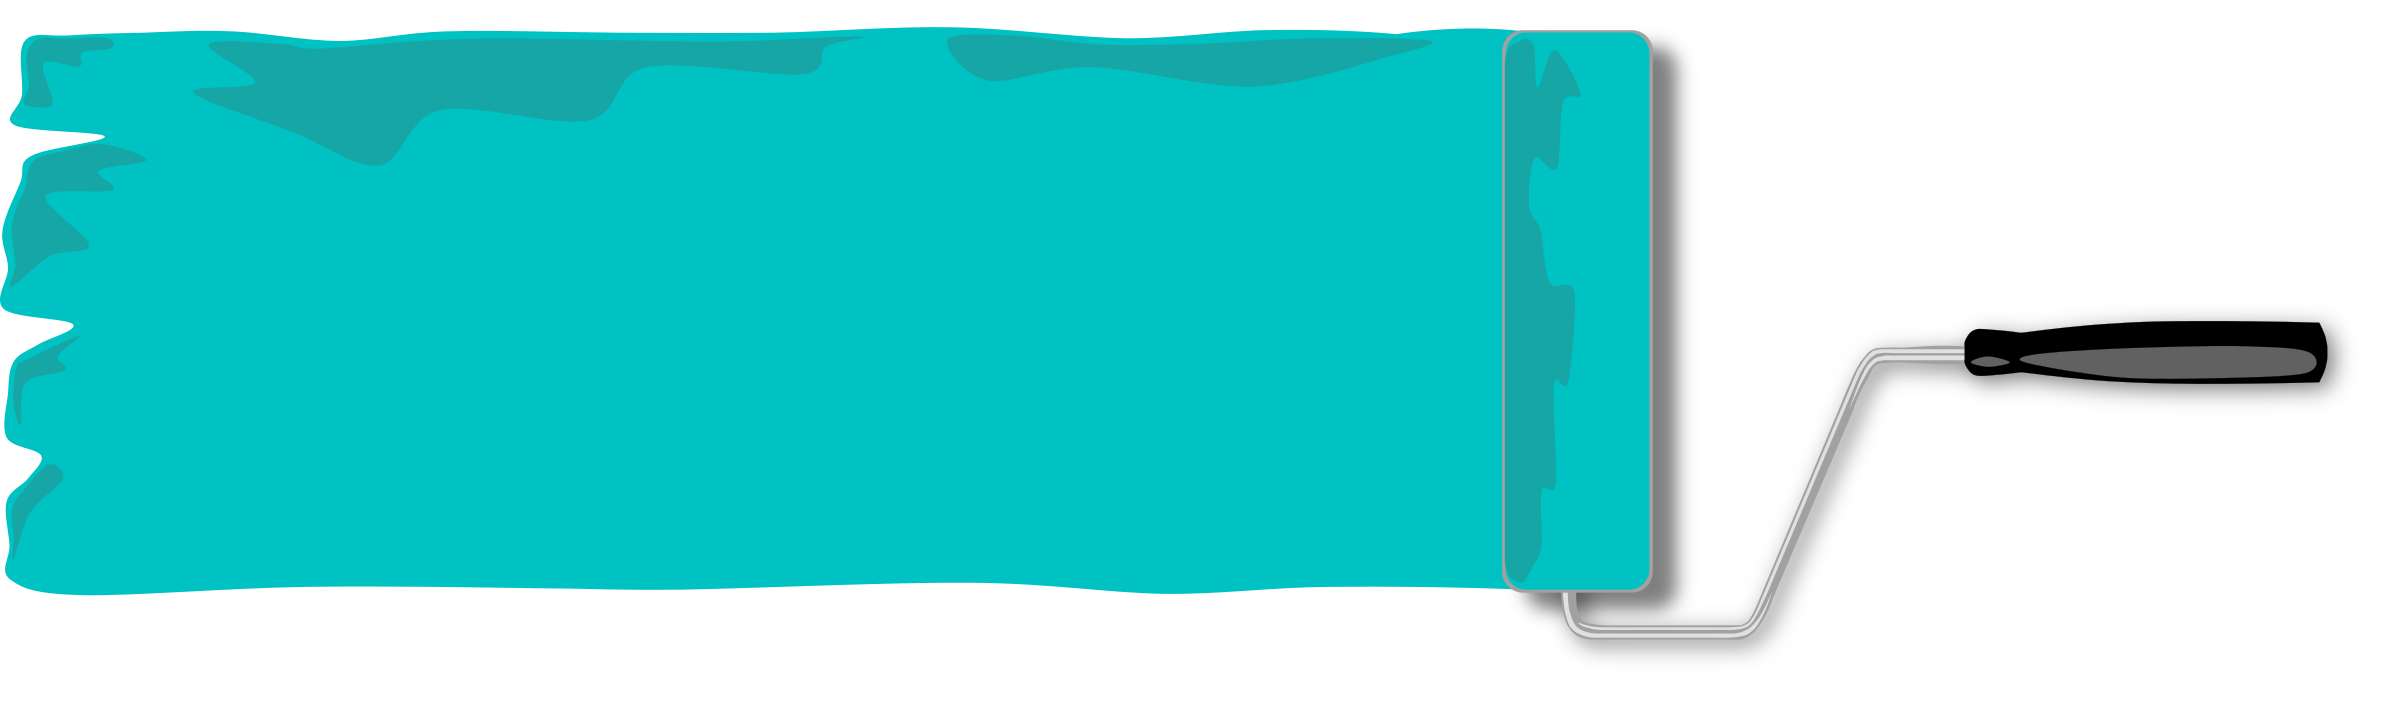 clipart banner teal